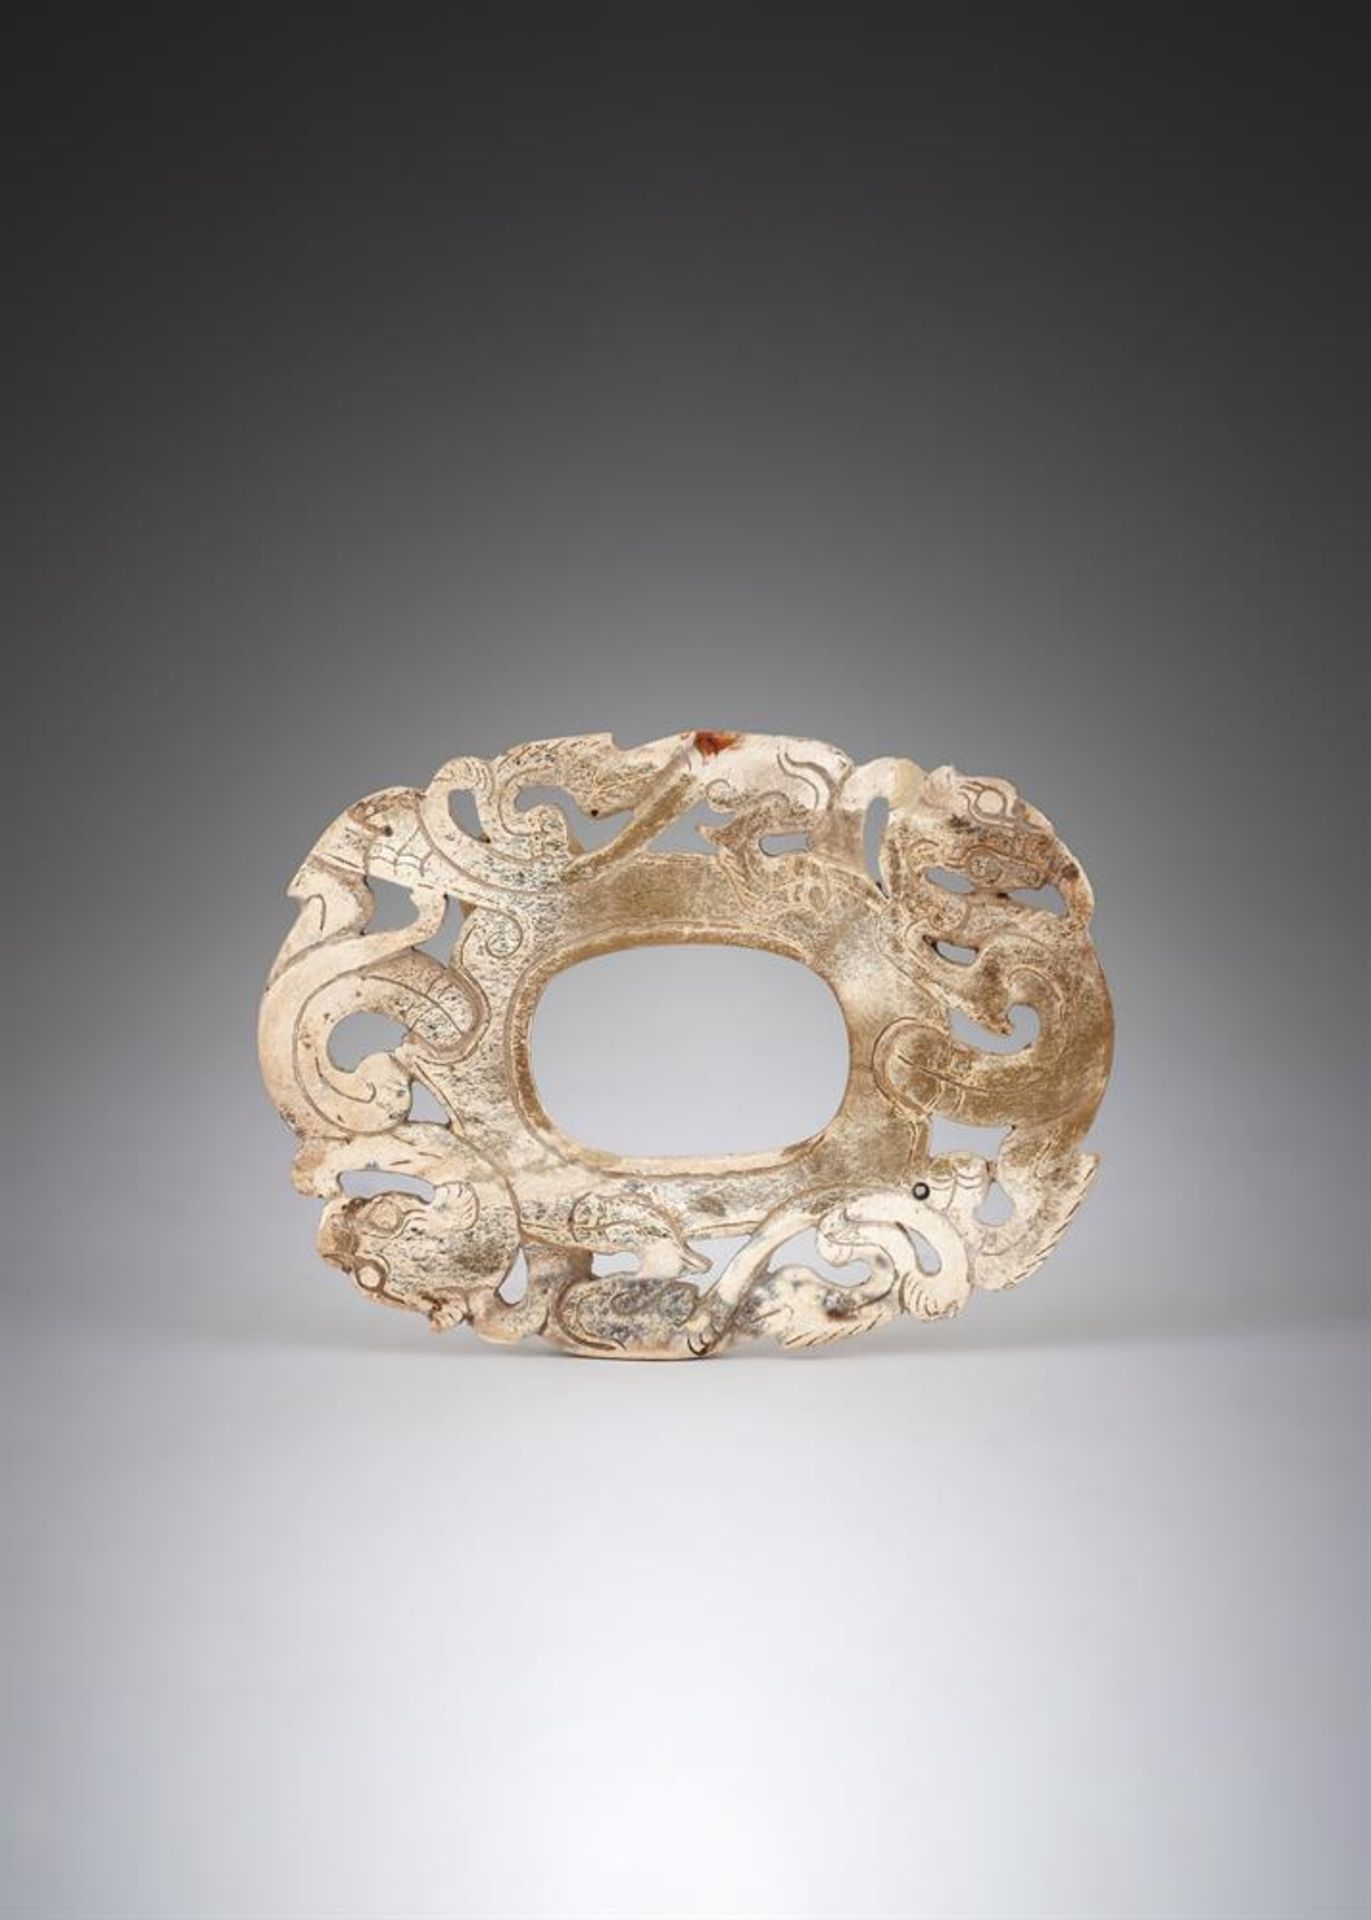 A CHINESE CALICIFIED 'CHICKEN BONE' JADE PLAQUE, WARRING STATES-HAN PERIOD (475 BC-220 AD)